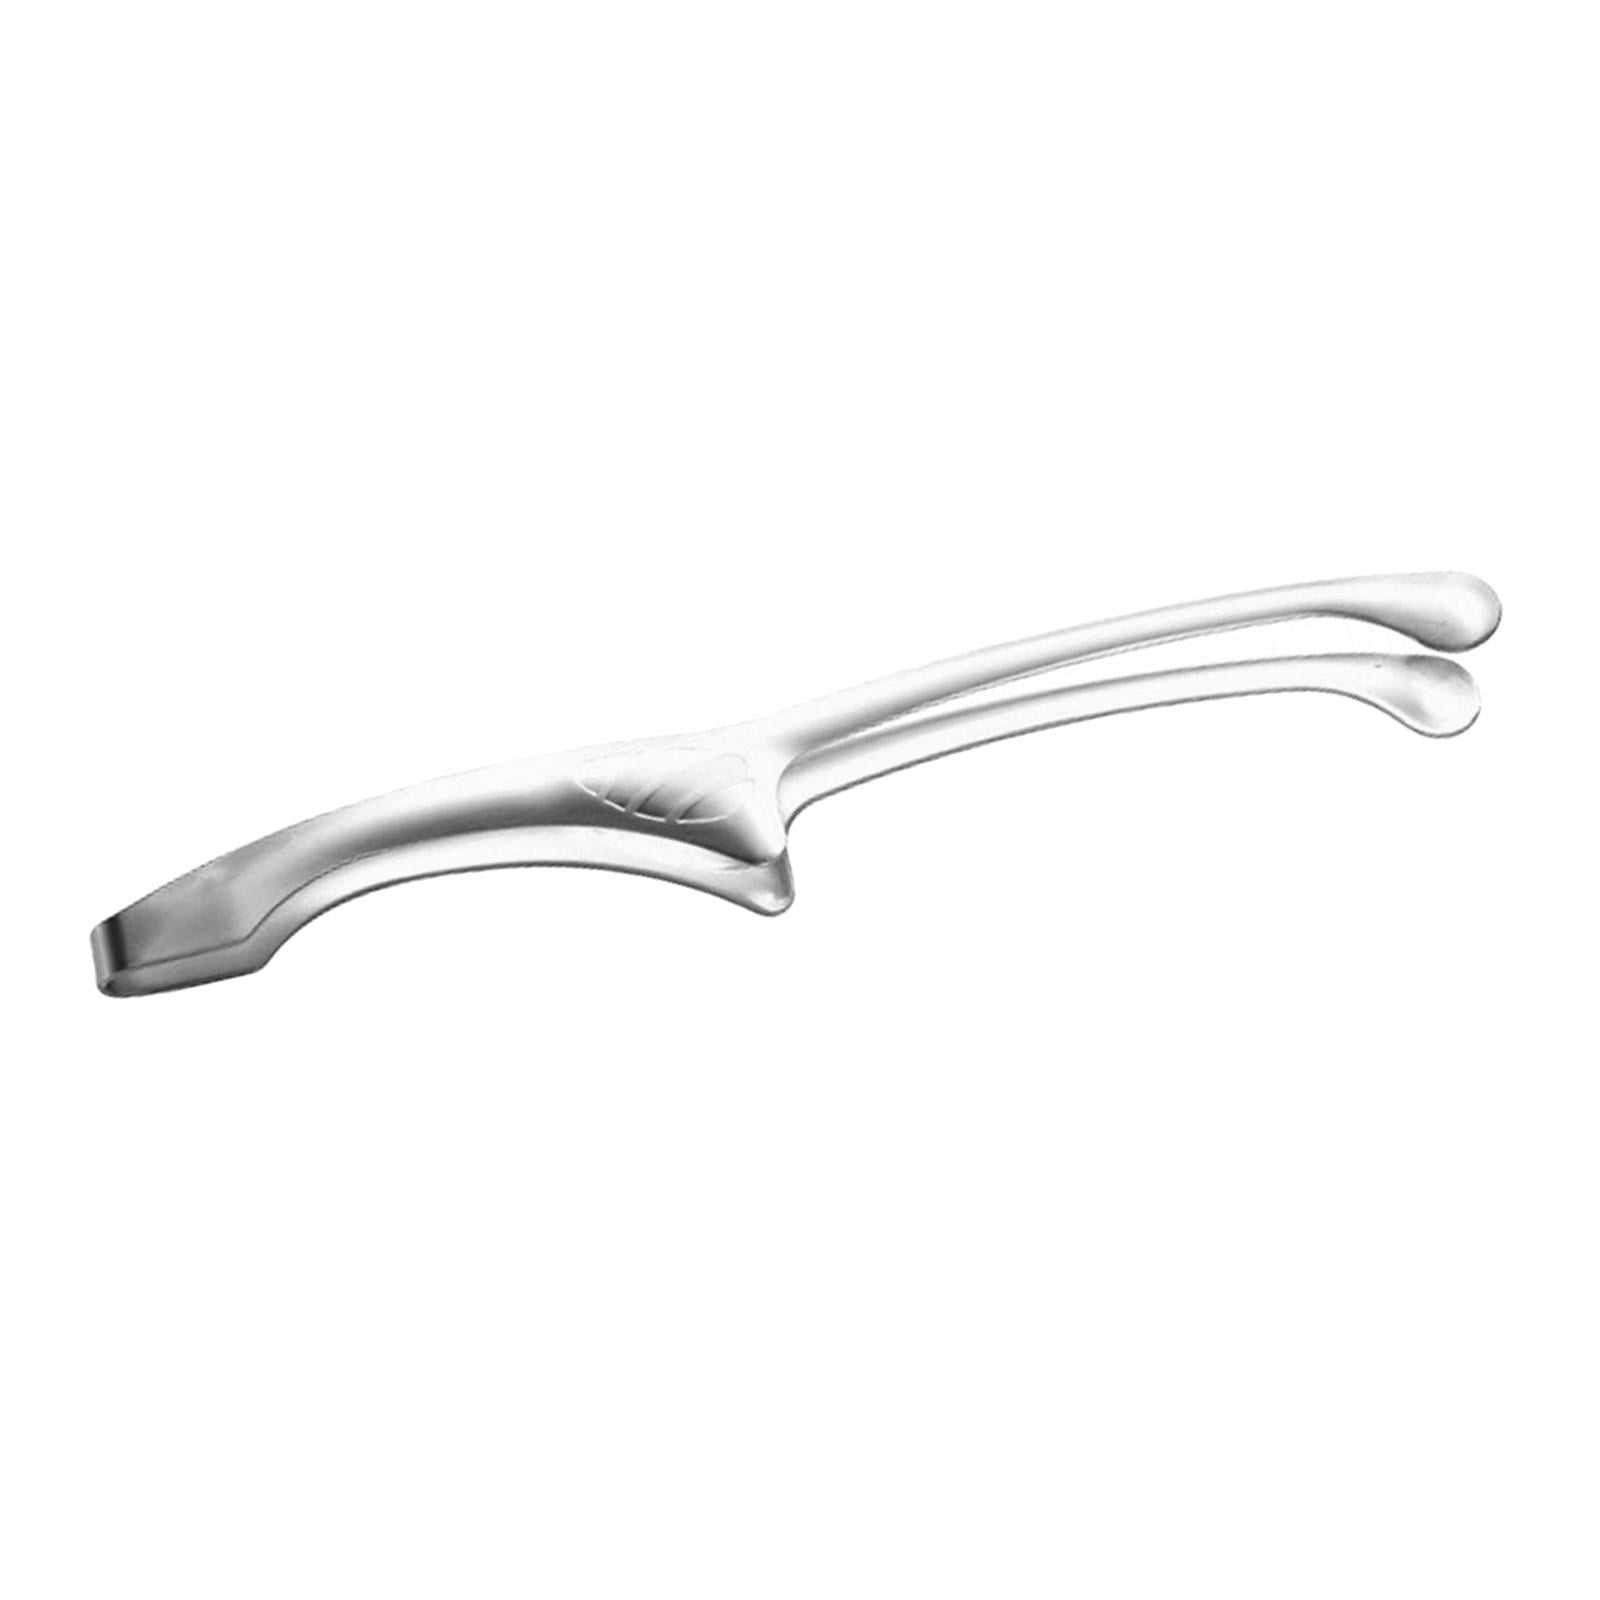 Stainless Steel Non-slip Clip Food Tong Heat-Resistant Handle Bread Clamp CB 